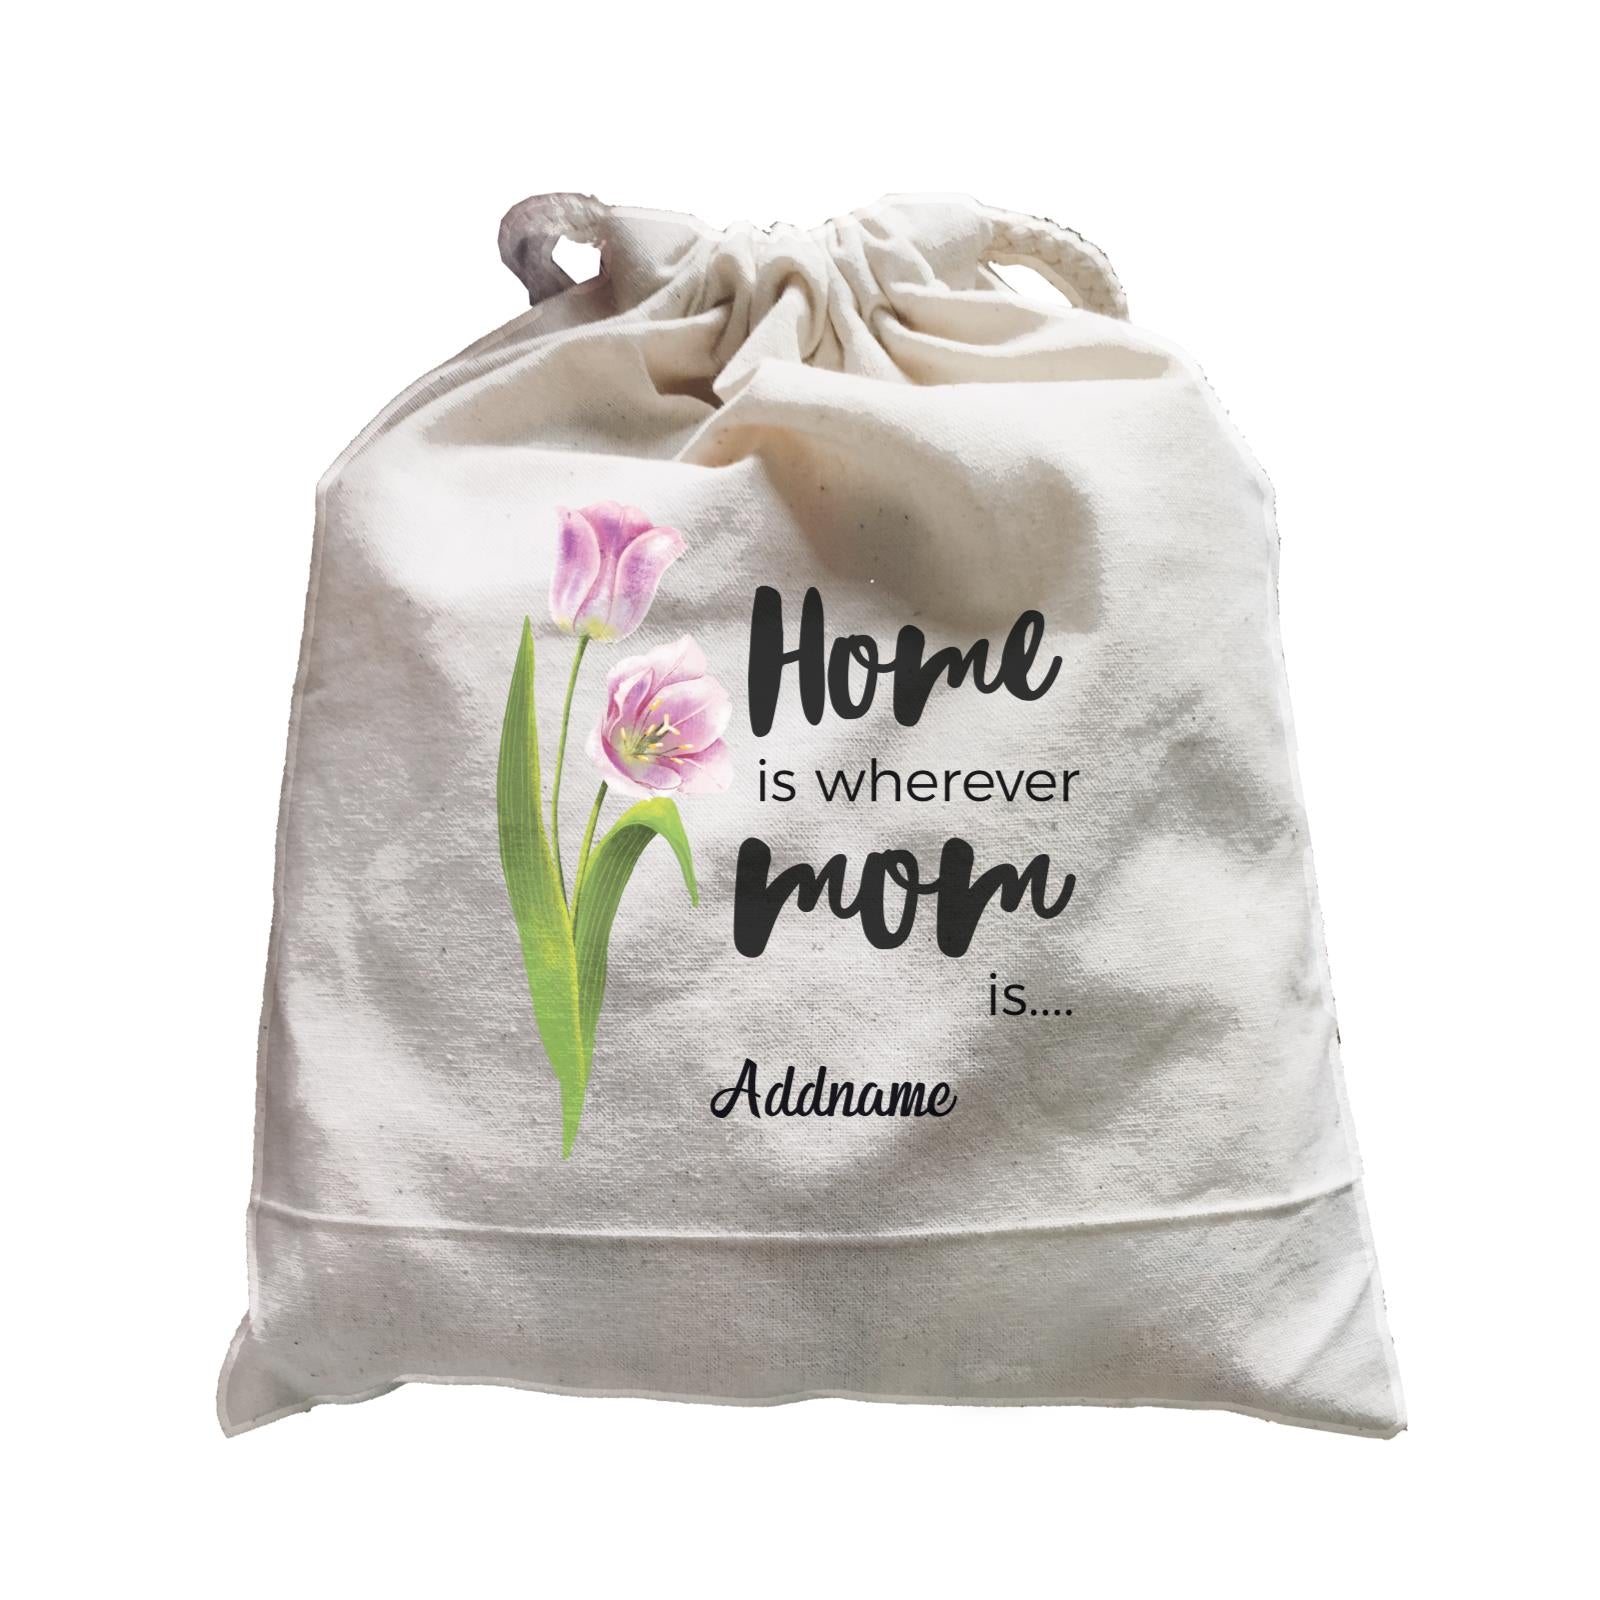 Sweet Mom Quotes 1 Tulip Home Is Wherever Mom Is Addname Satchel